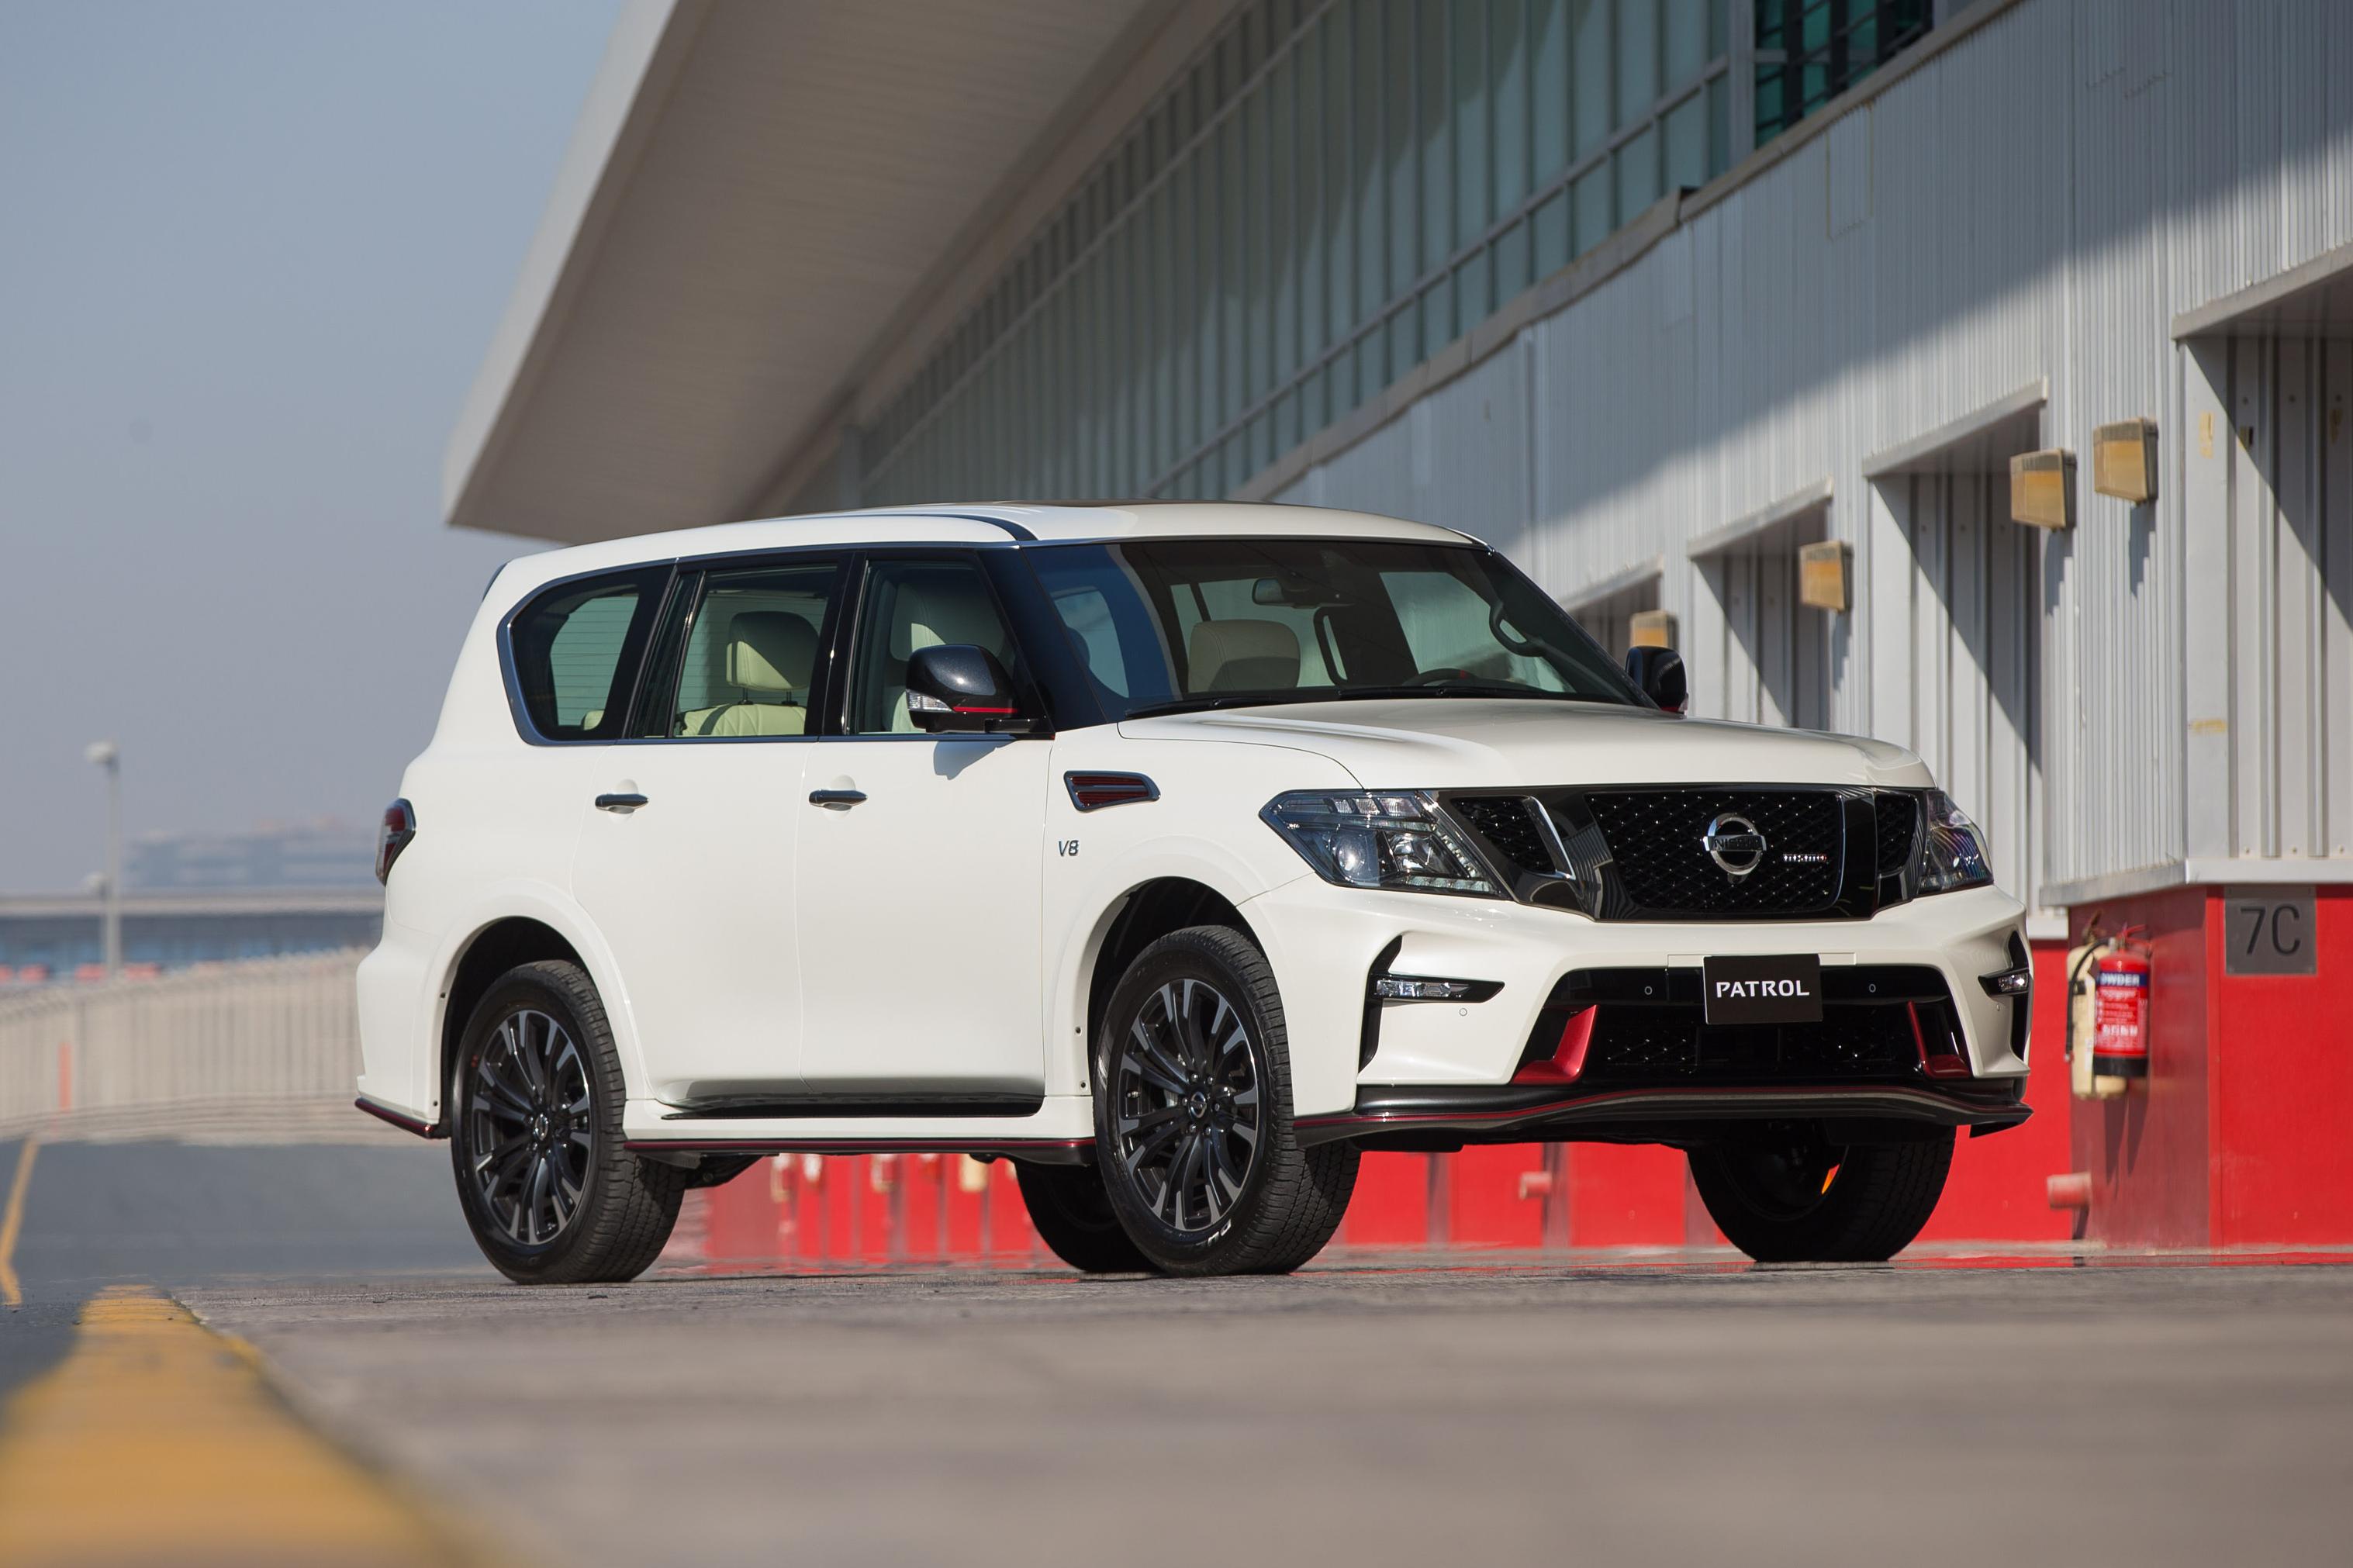 2021 Nissan Patrol Nismo is forbidden fruit we want to try